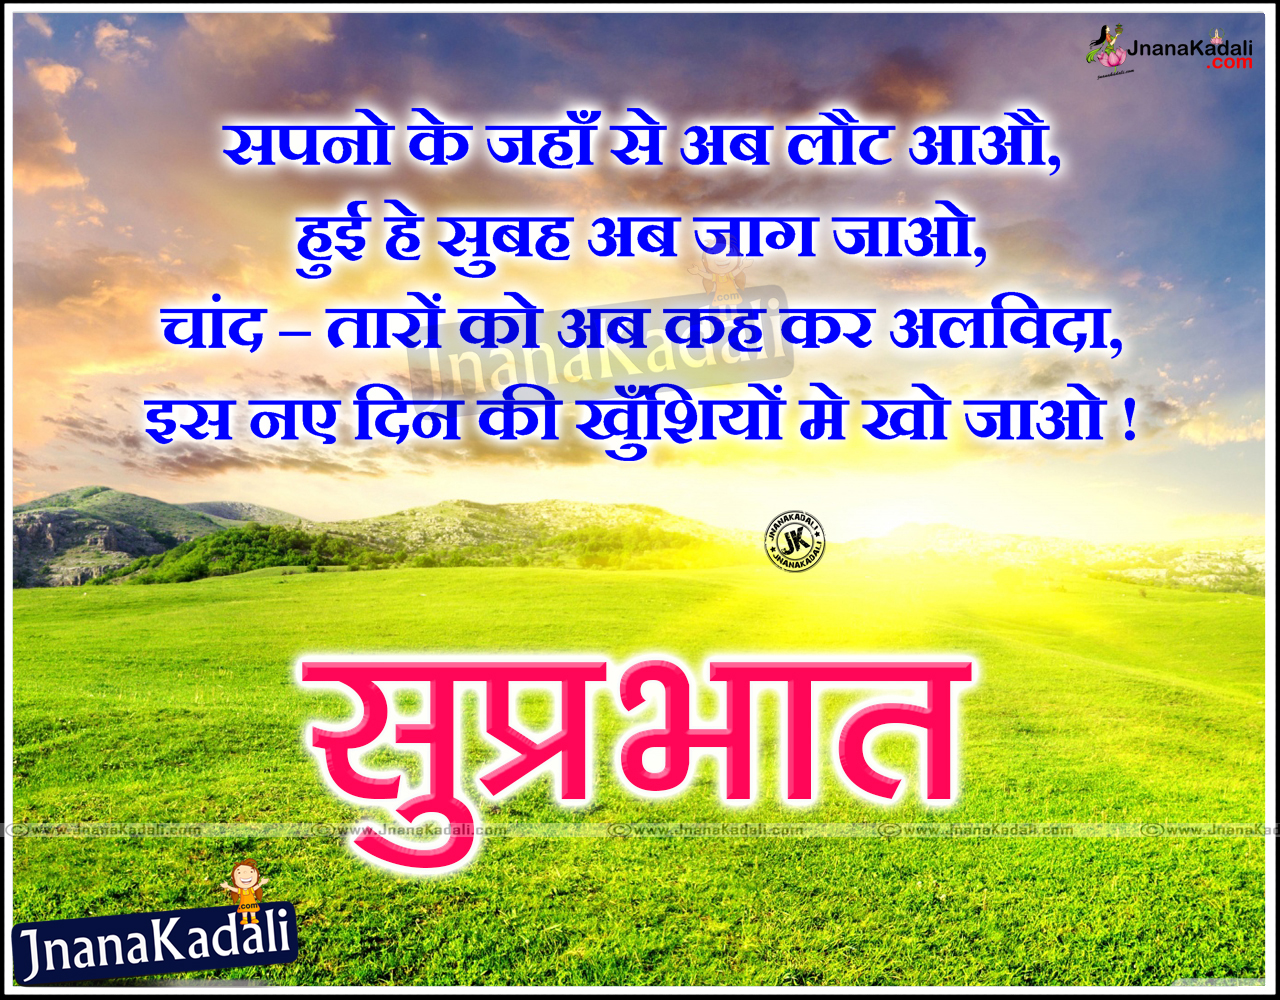 Hindi Best Good Morning Shayri & Morning Images Quotations for Friends